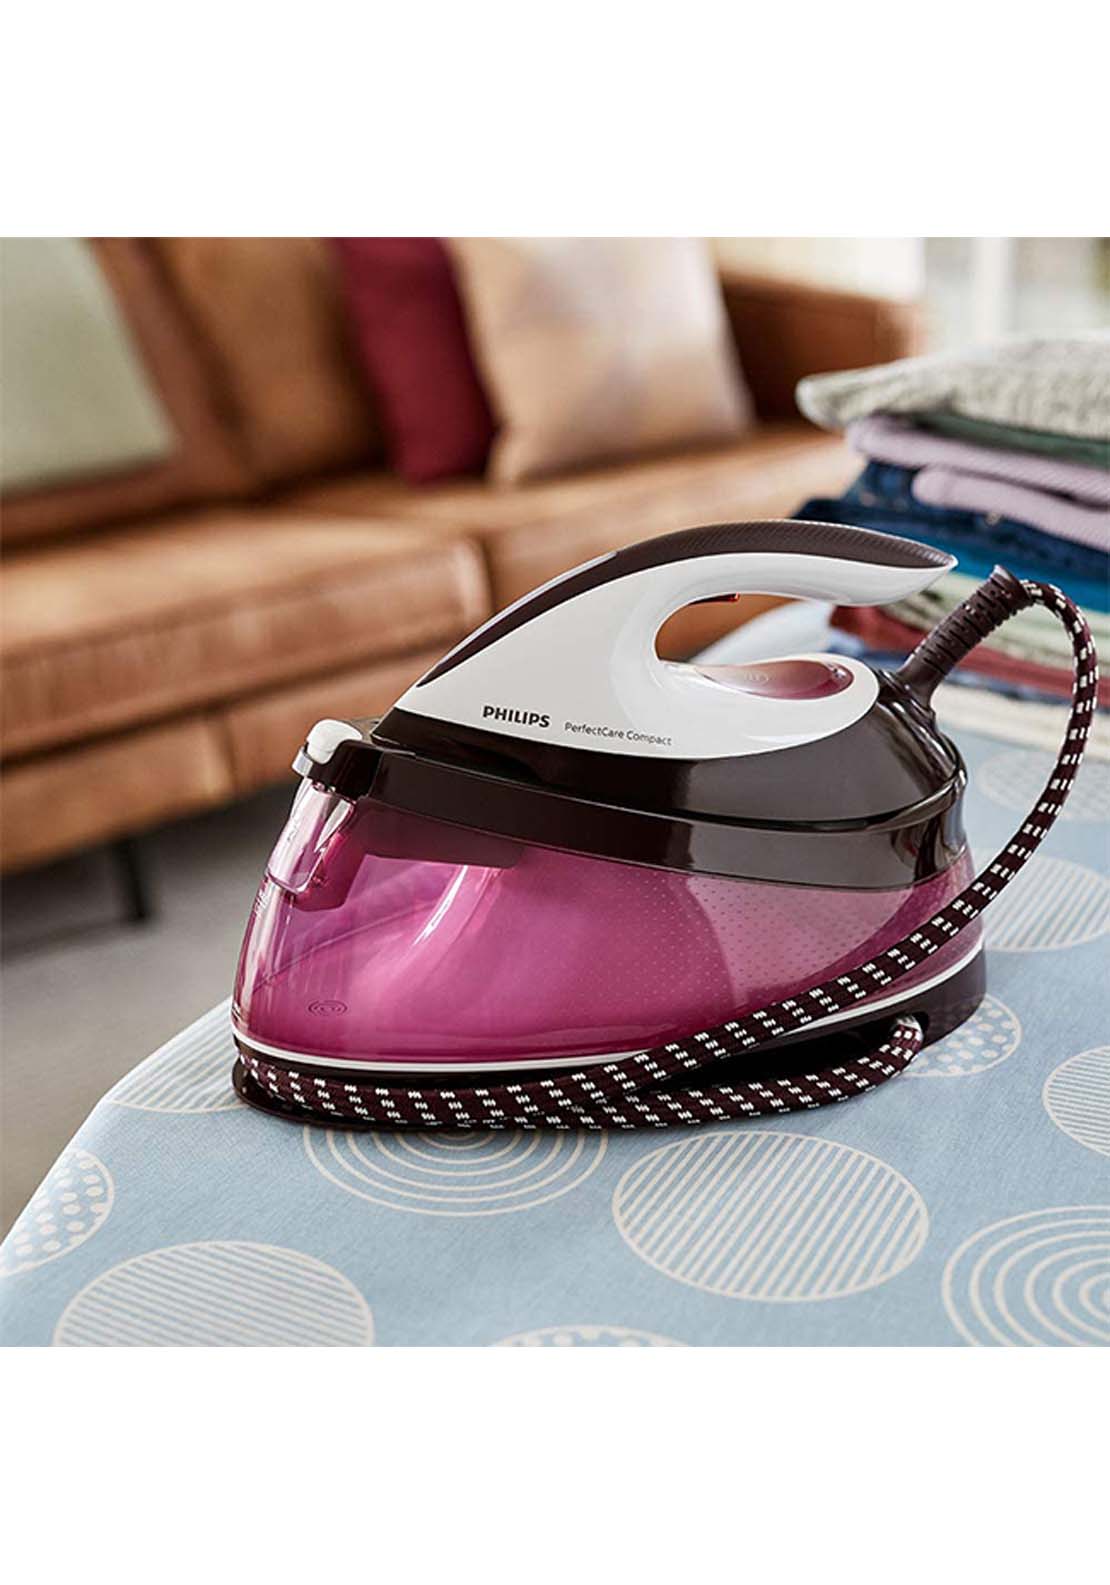 Philips PerfectCare Steam Iron | Gc784246 4 Shaws Department Stores